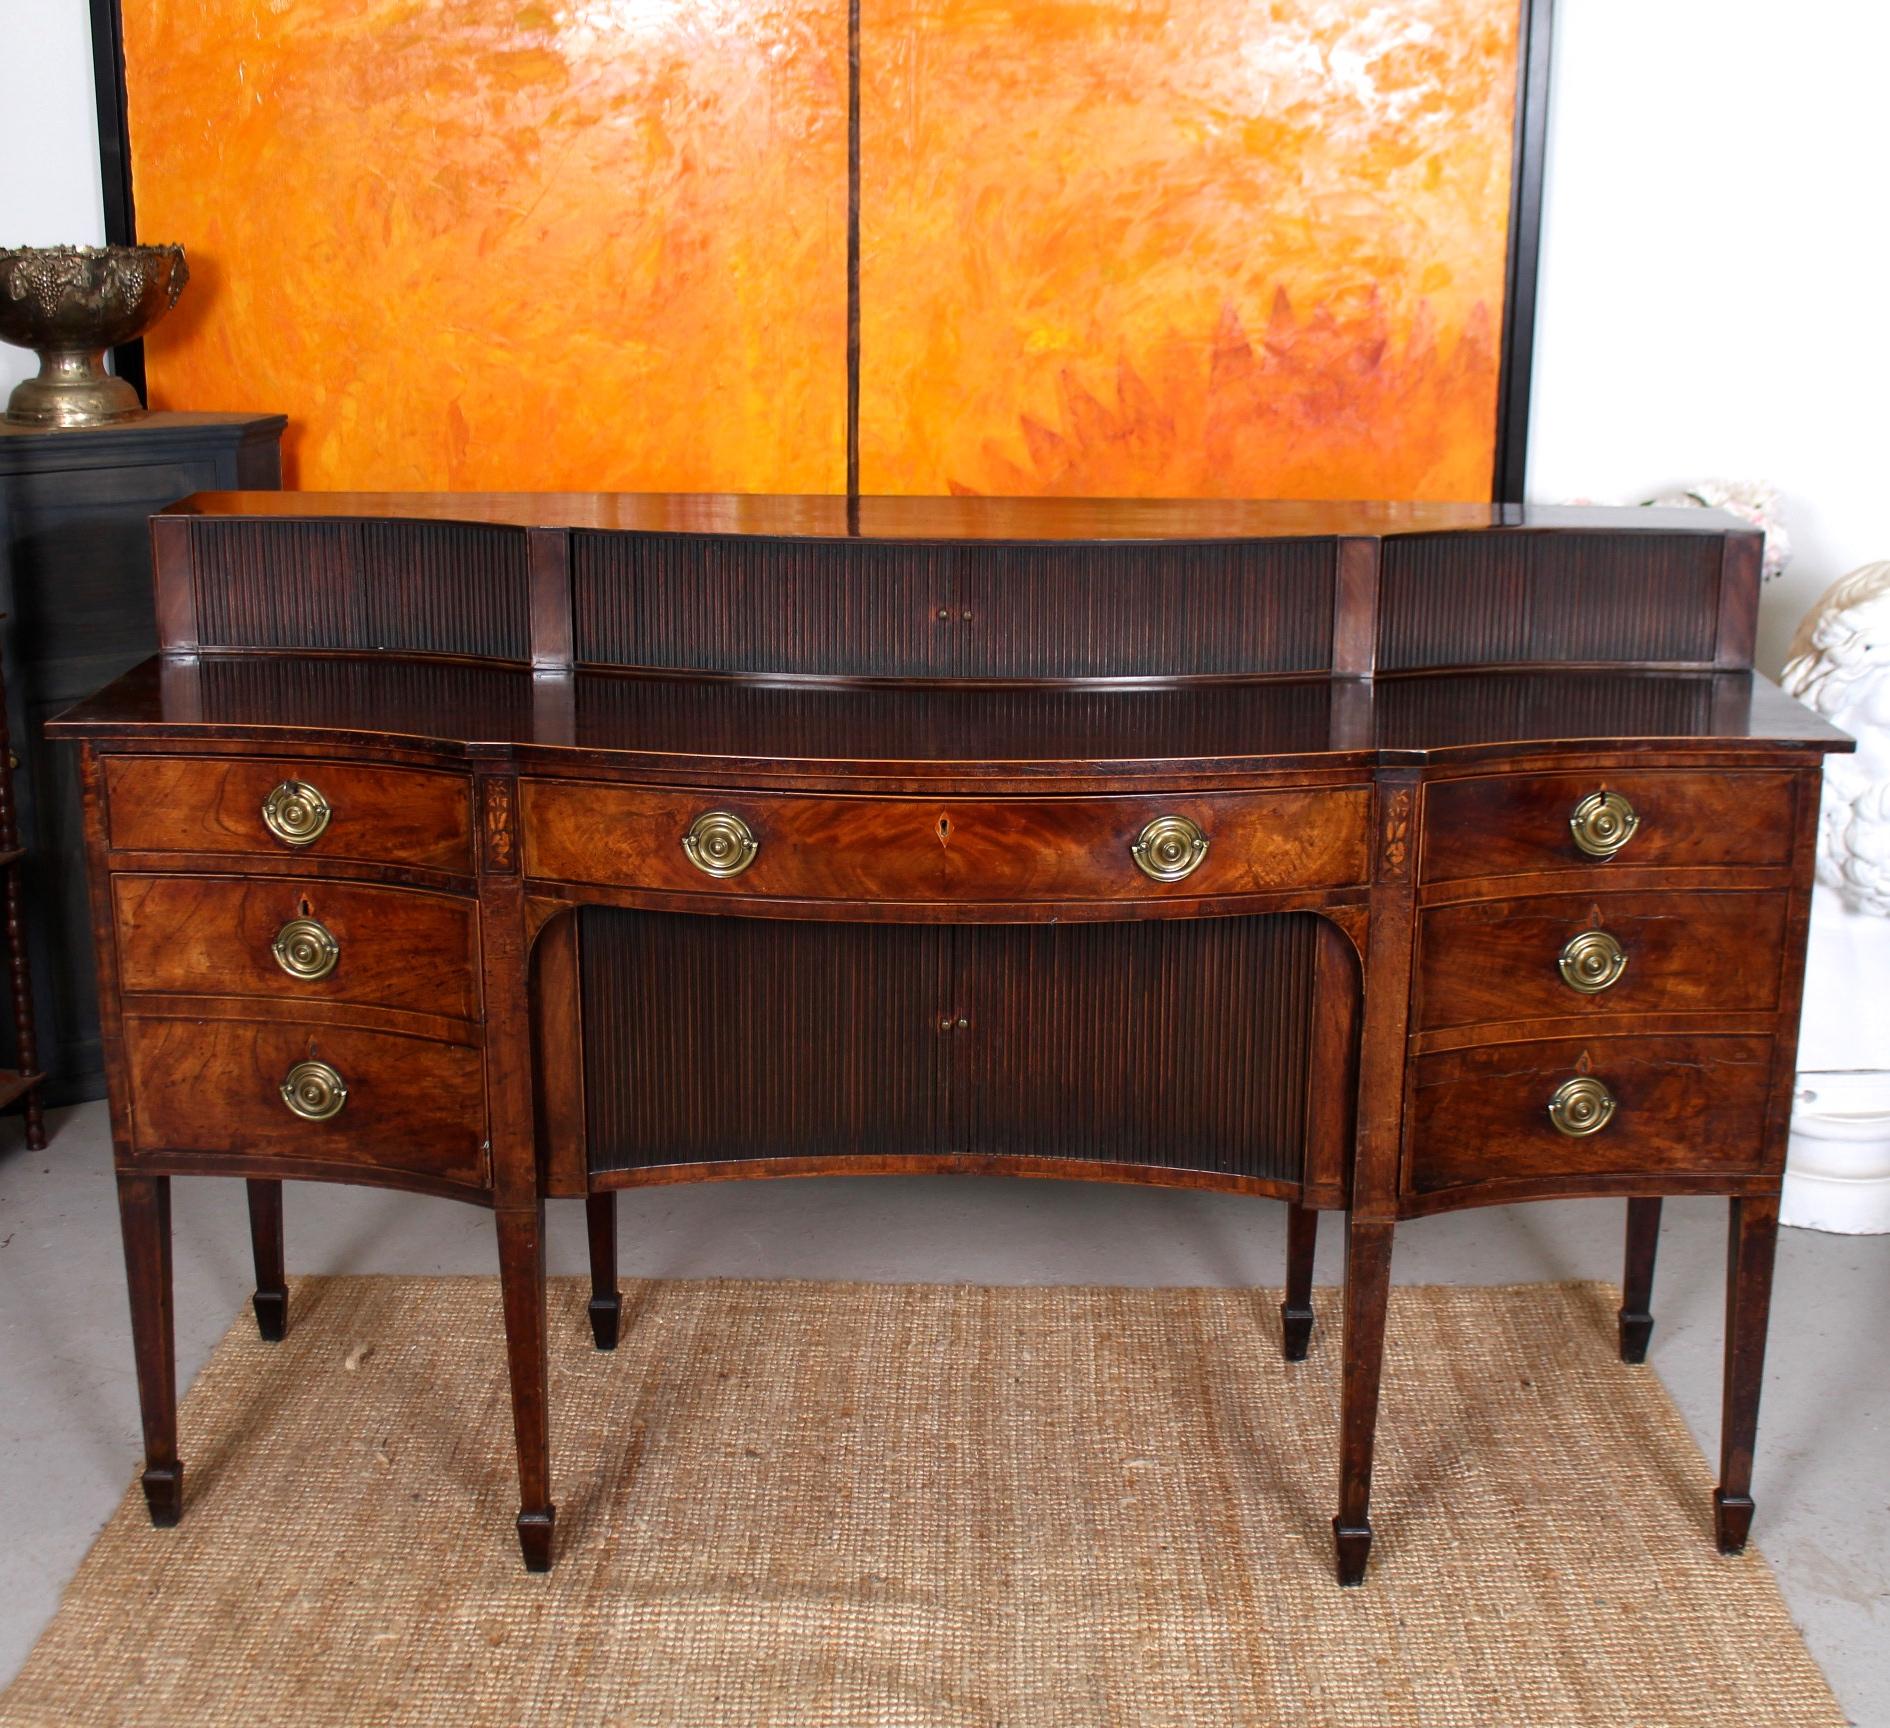 A fine quality rare form George III period serpentine sideboard.

The polished flamed mahogany inlays boasting an impressive grain.

The serpentine superstructure fitted central tambour doors and two outer tambour doors above a conforming